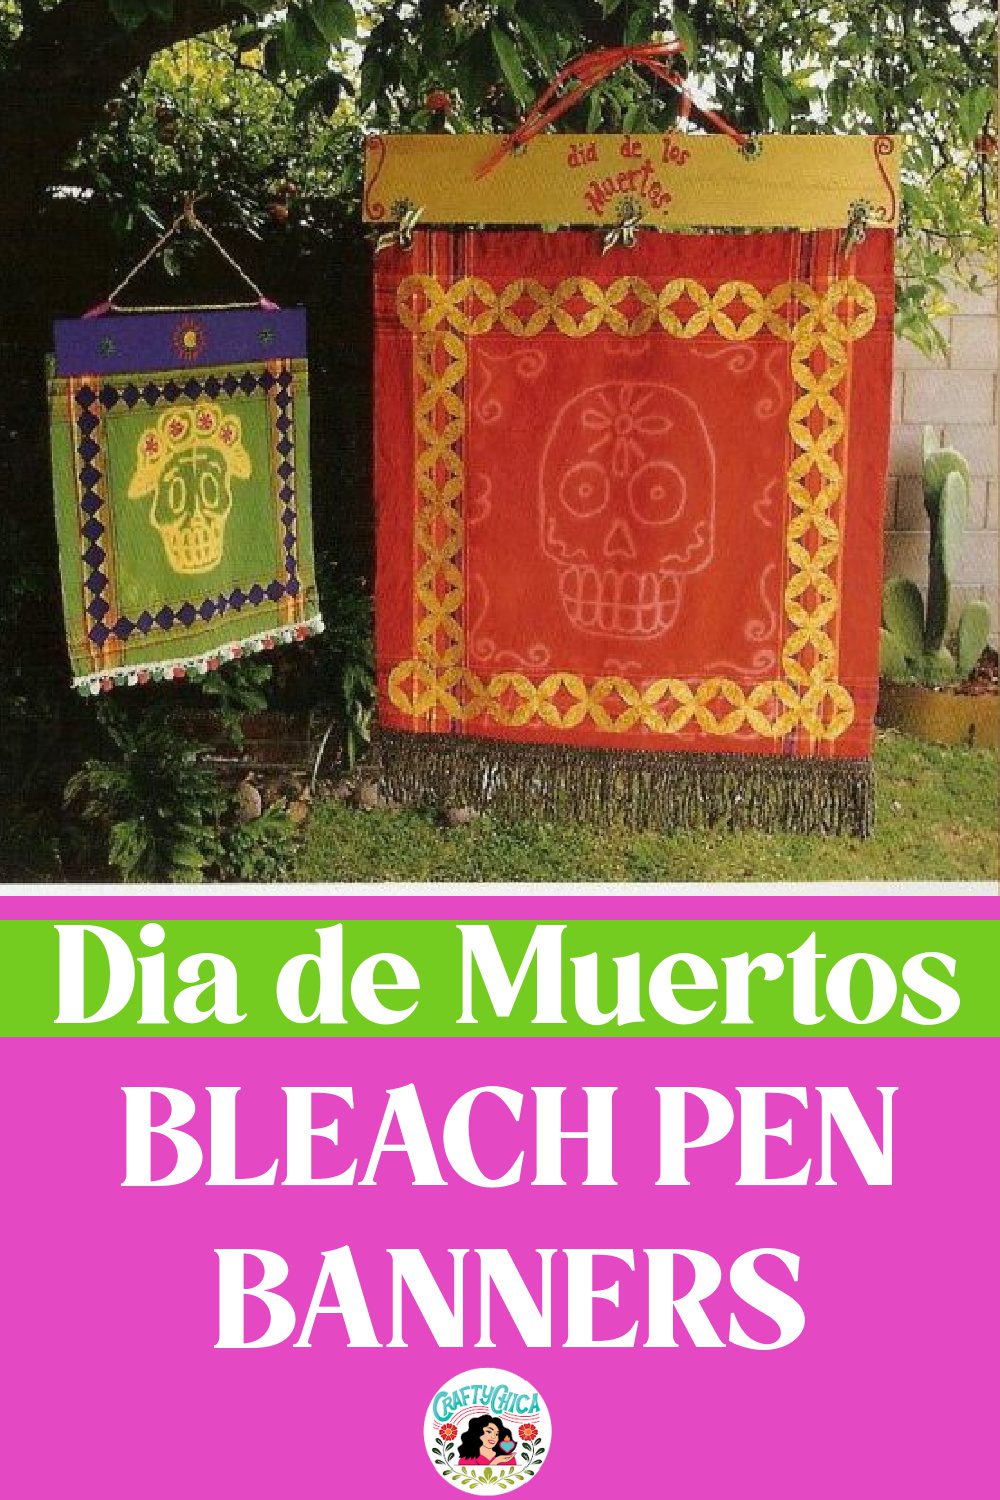 diy day of the dead banners